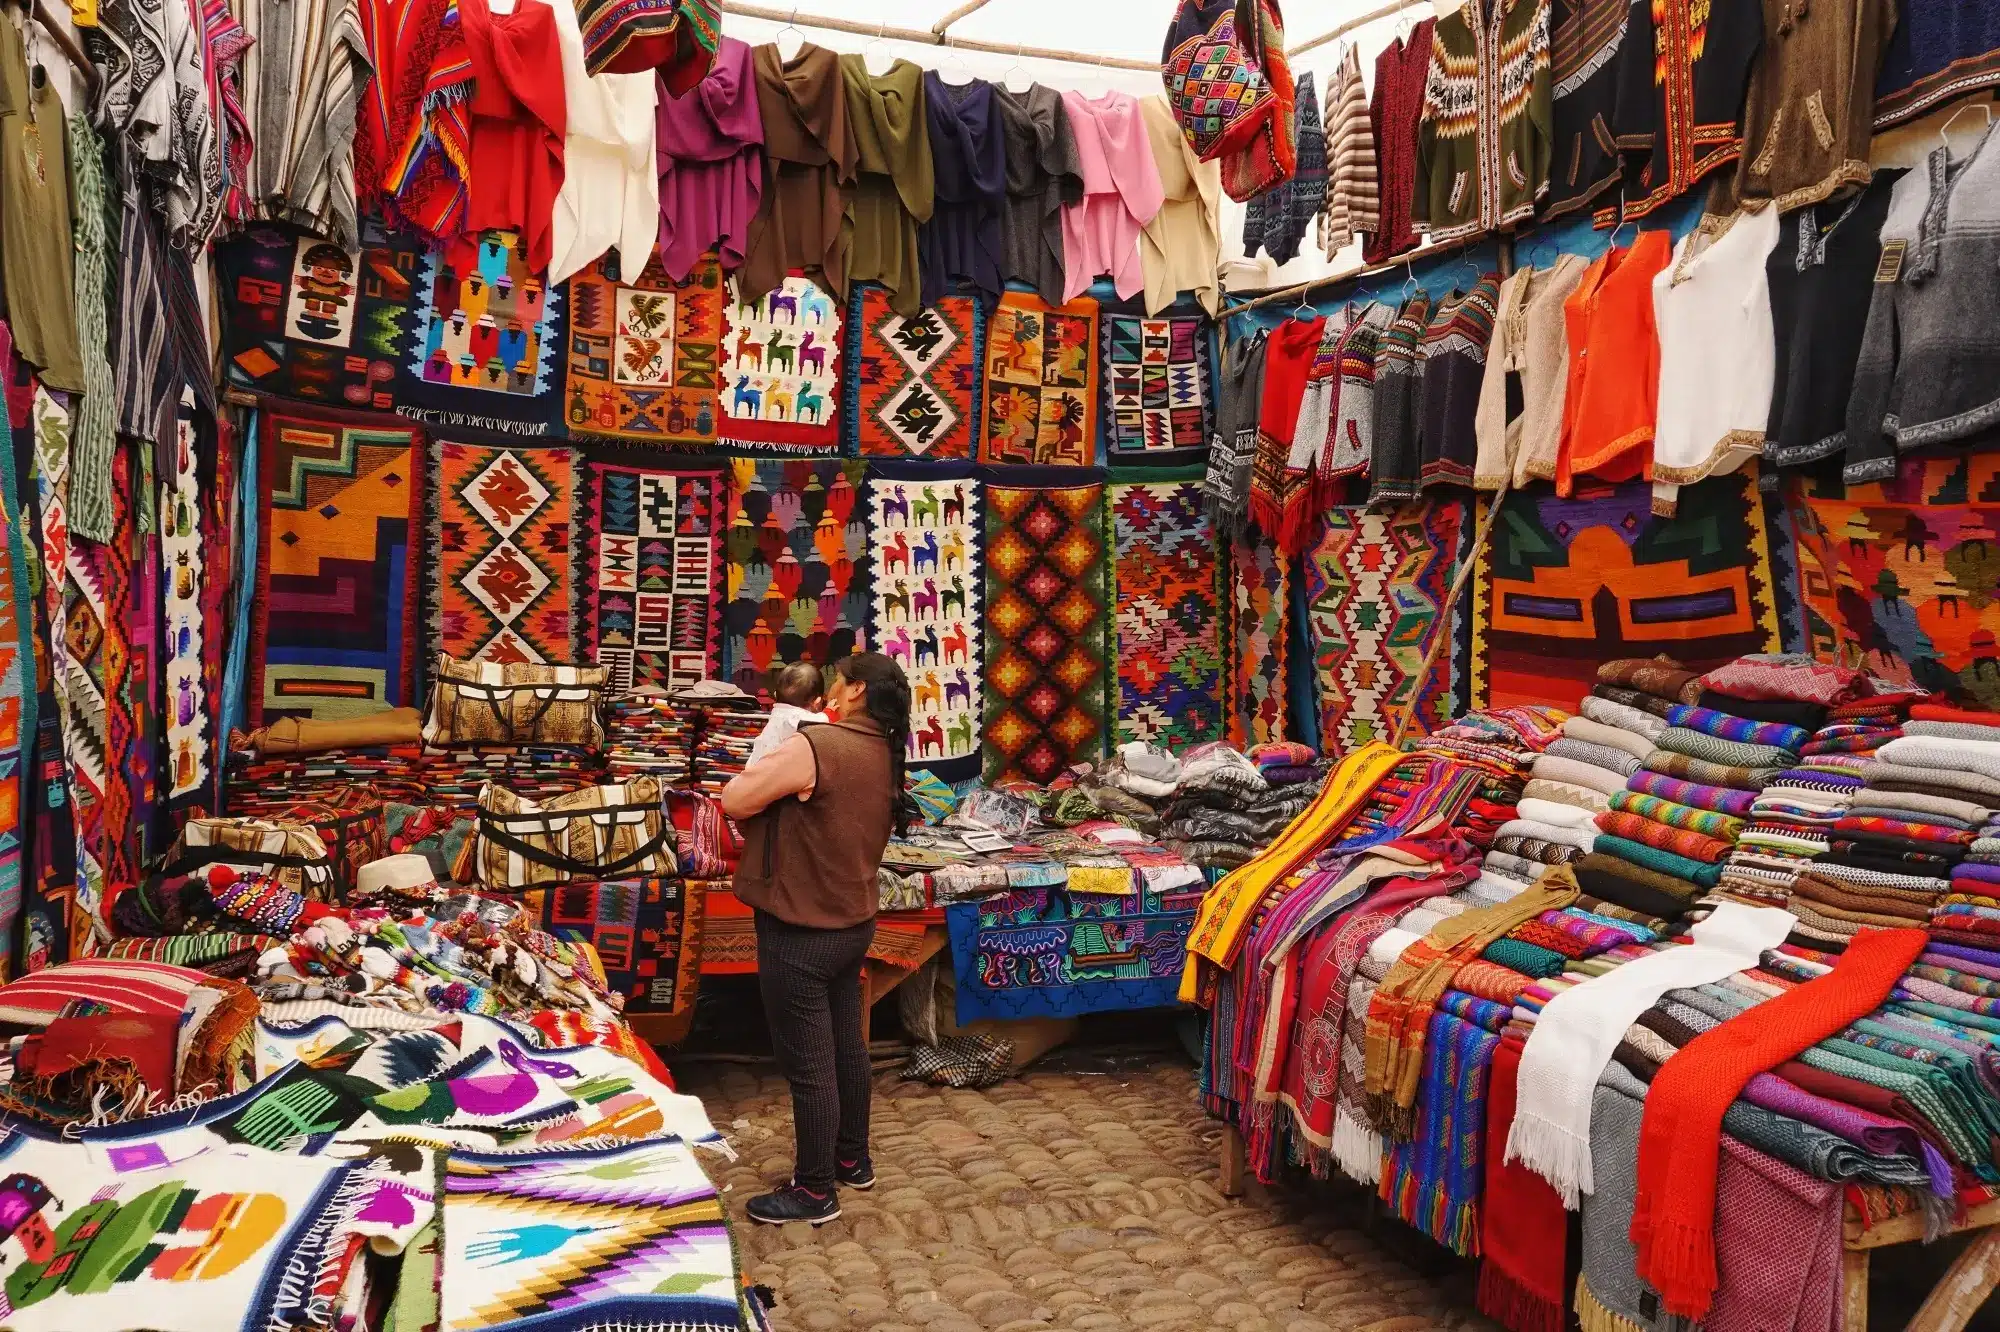 A market stall that sells different kinds of fabric, representing the concept of GST input tax credits.